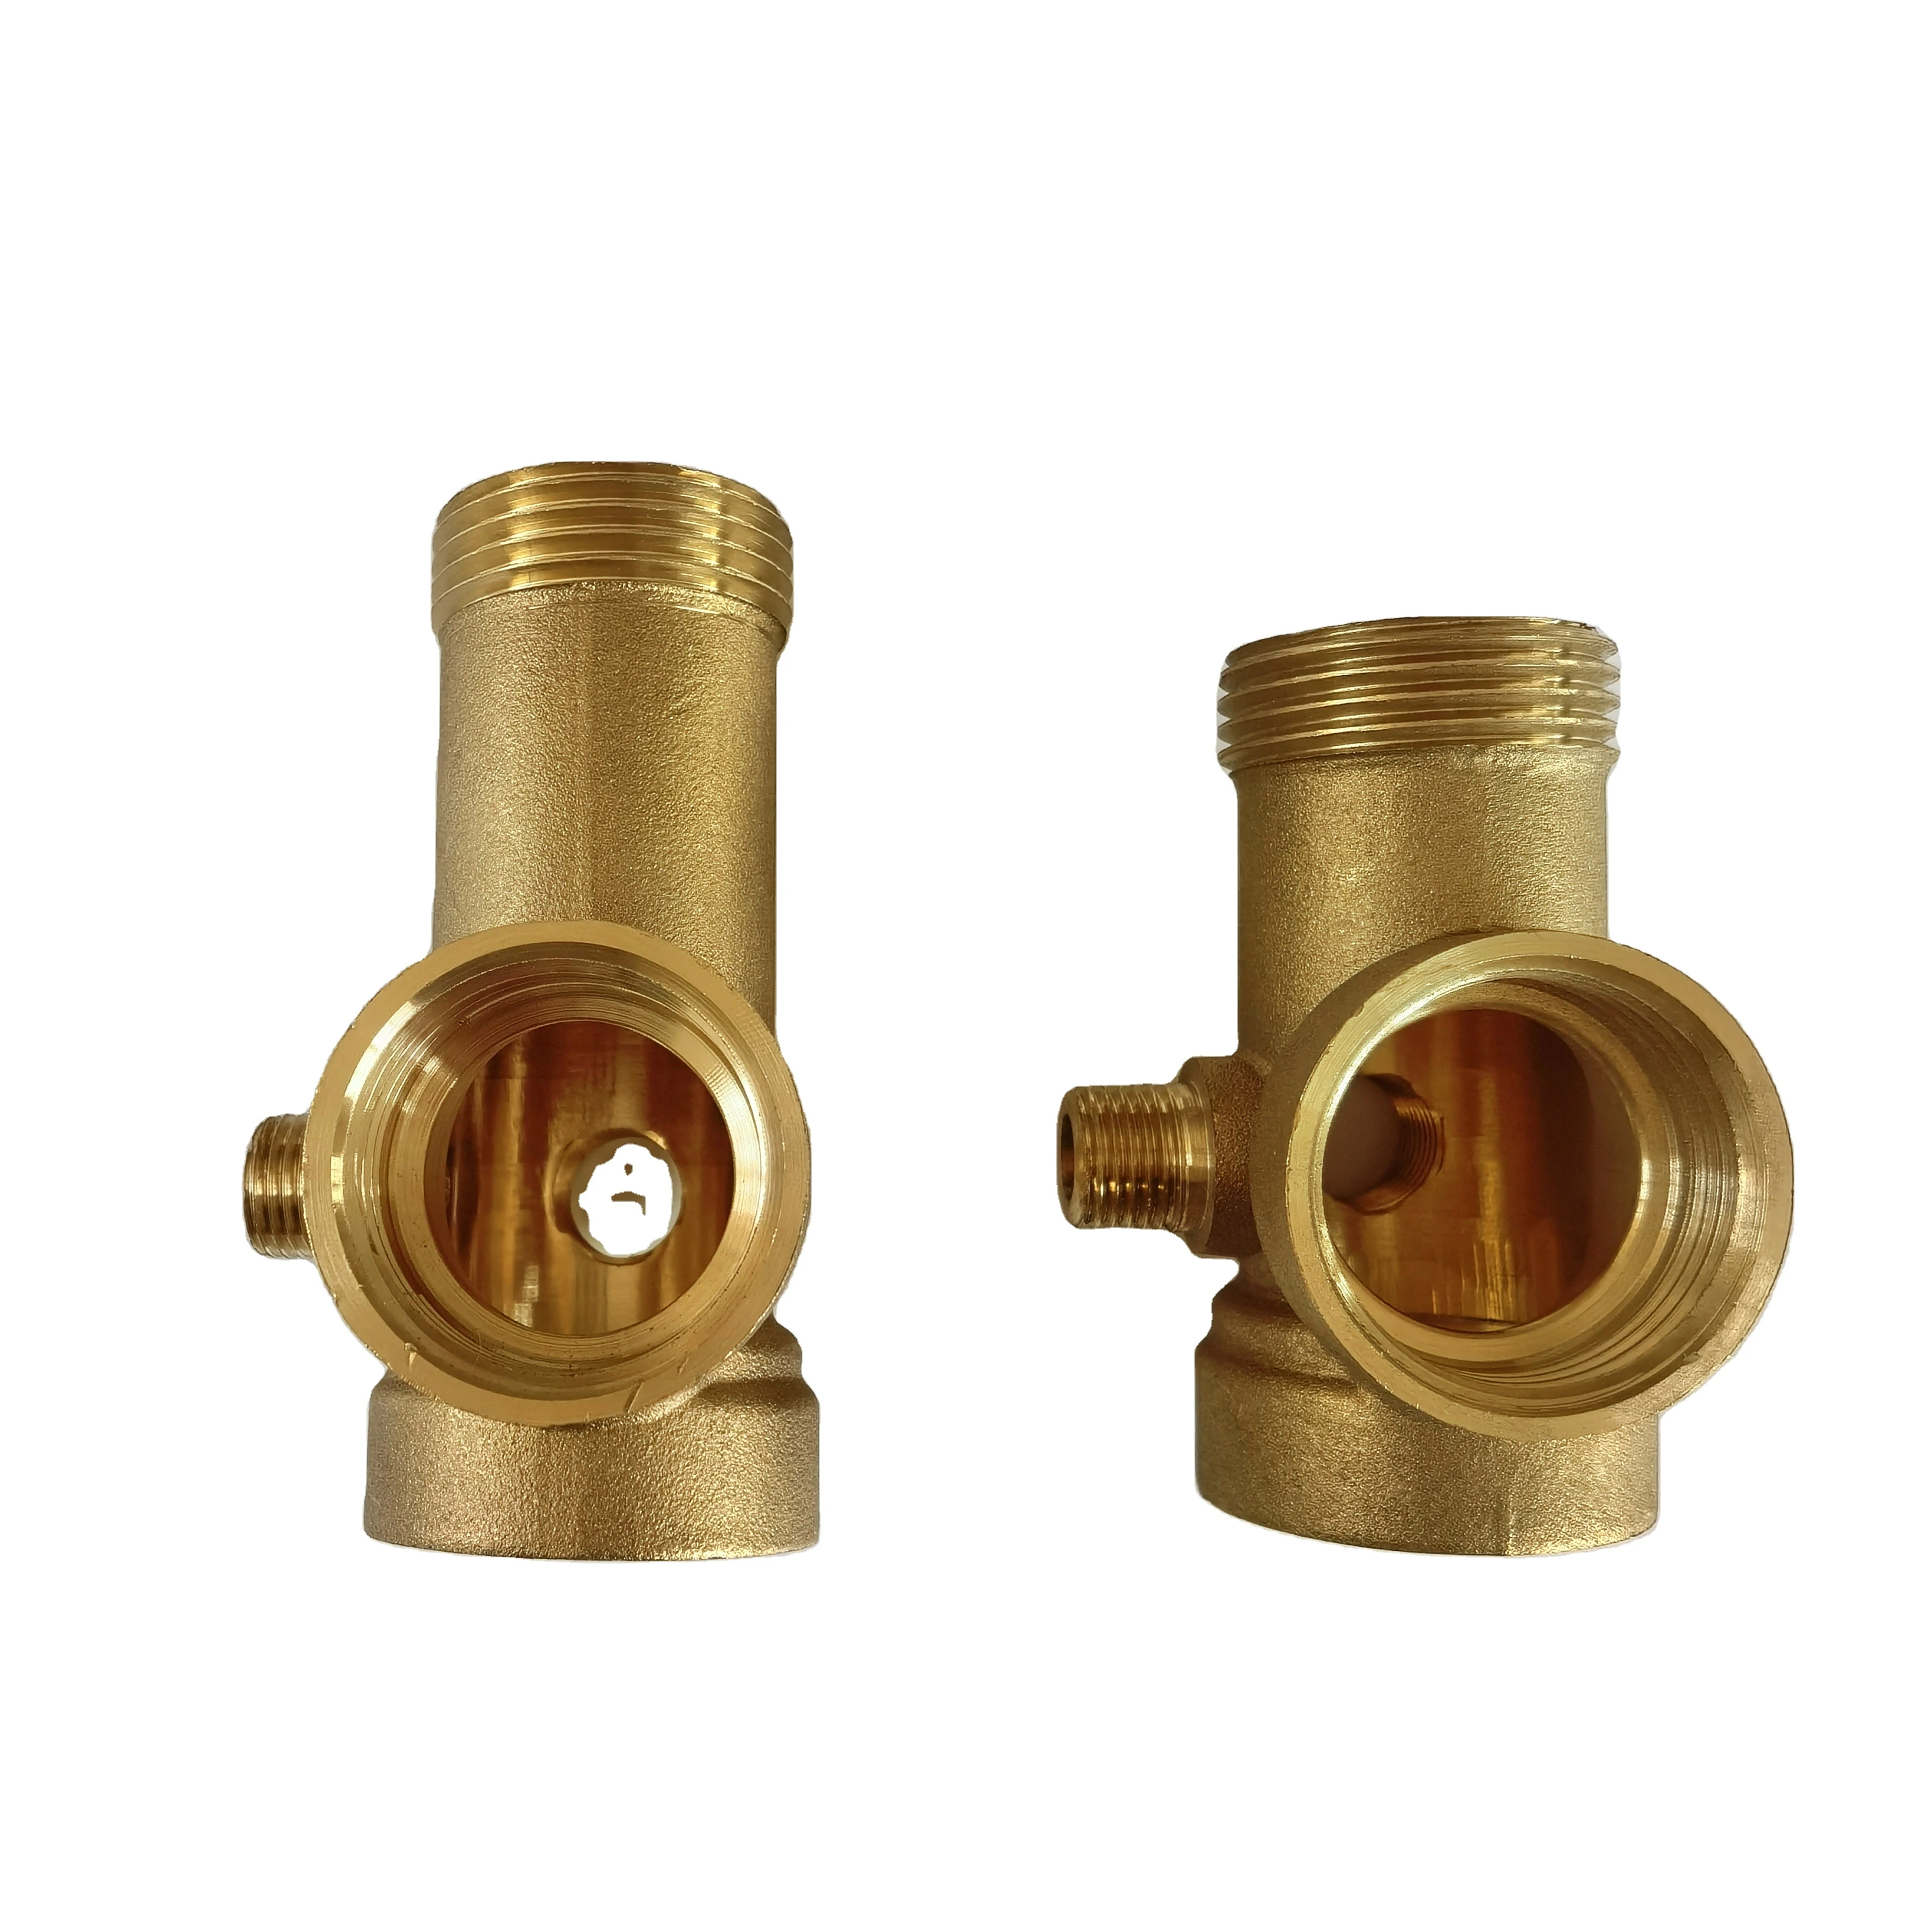 1/4 1/2 3/4 1 inch 5 ways transfrom copper joint connector union brass plumbing pipe fittings